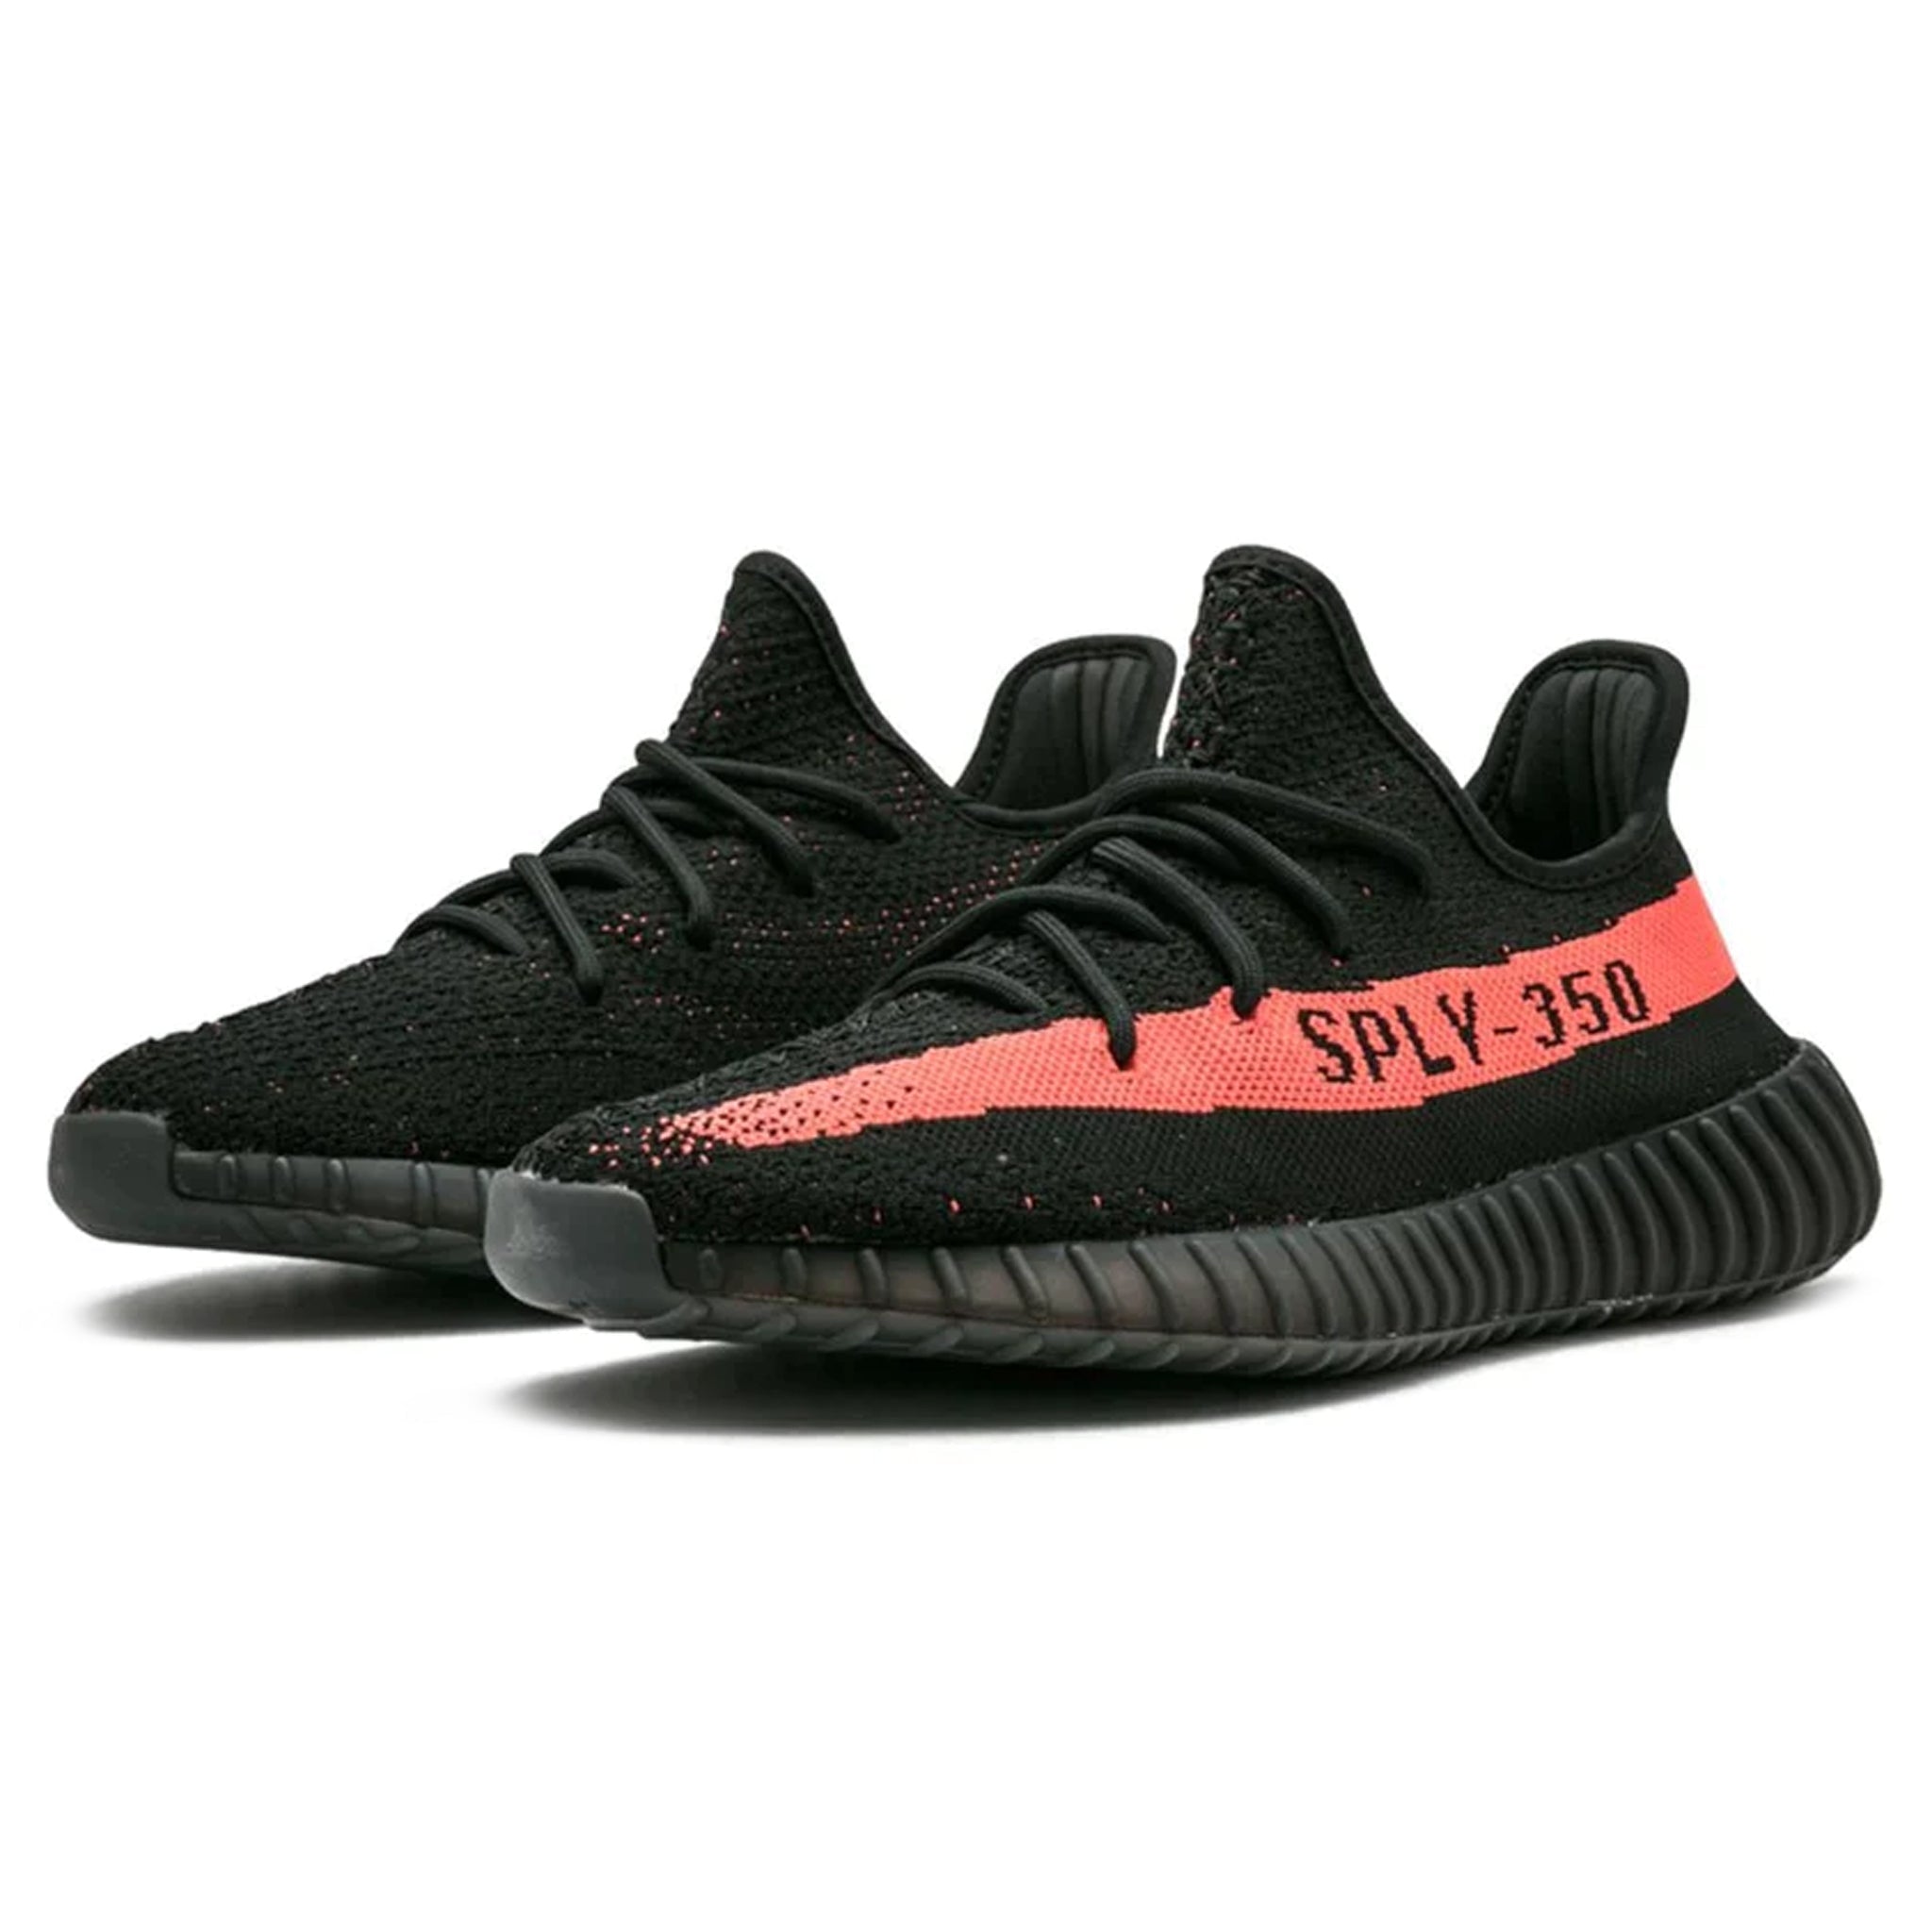 Adidas Yeezy 350 V2 Boost 'Core Red' 